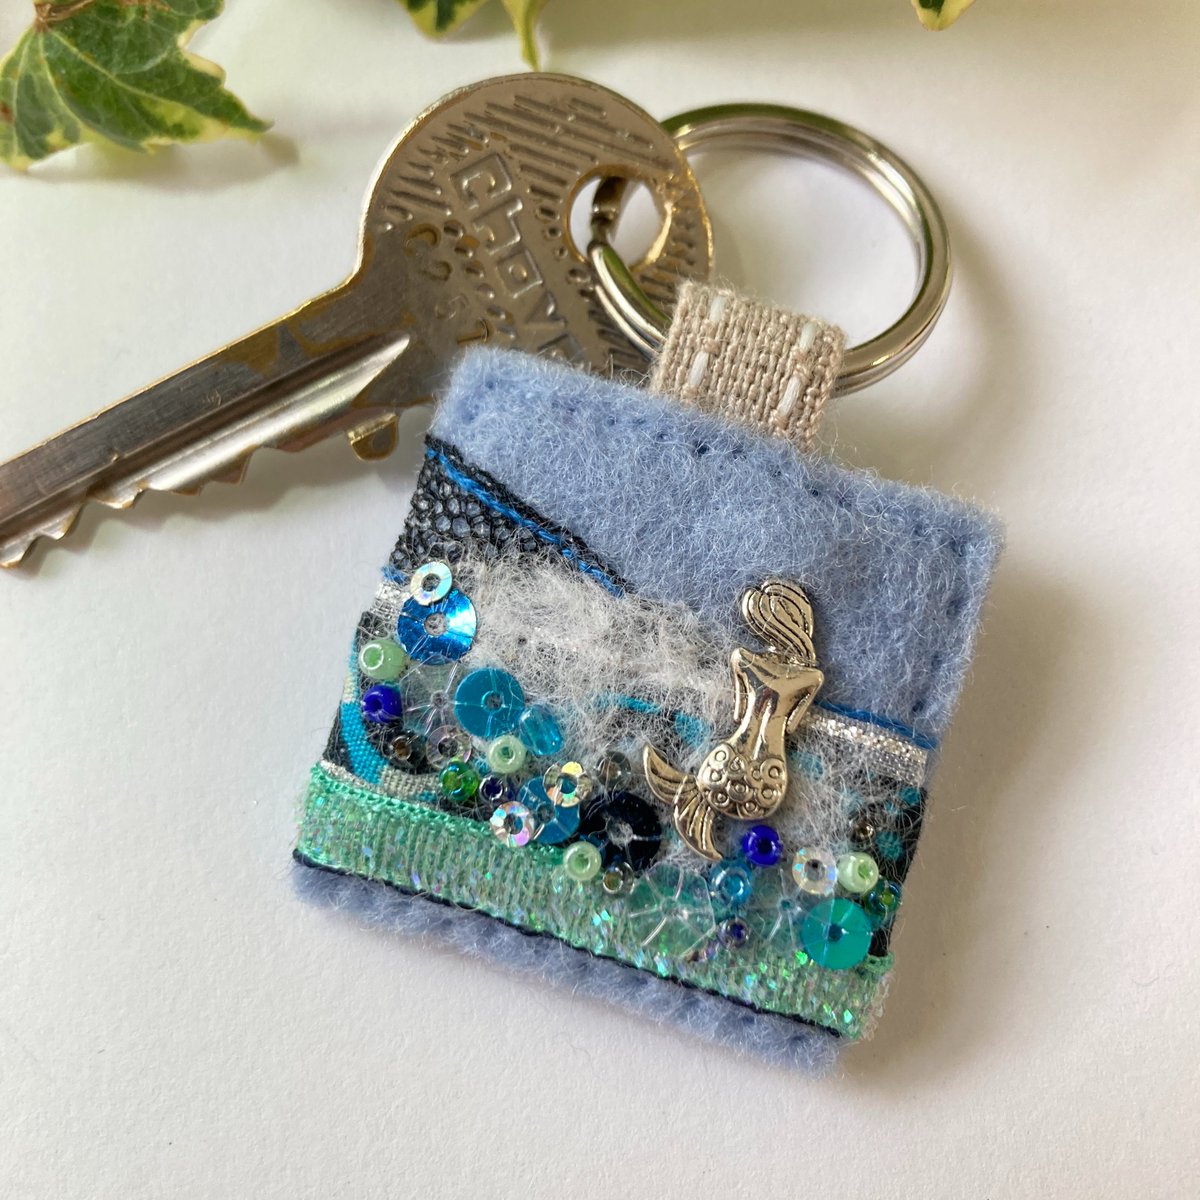 Beautiful mermaid keyring hand sewn in cool ocean colours from mixed fabrics, trims and embellishments. elliestreasures.square.site/product/mermai… #EarlyBiz #MHHSBD #shopindie #mermaid #uniquegifts